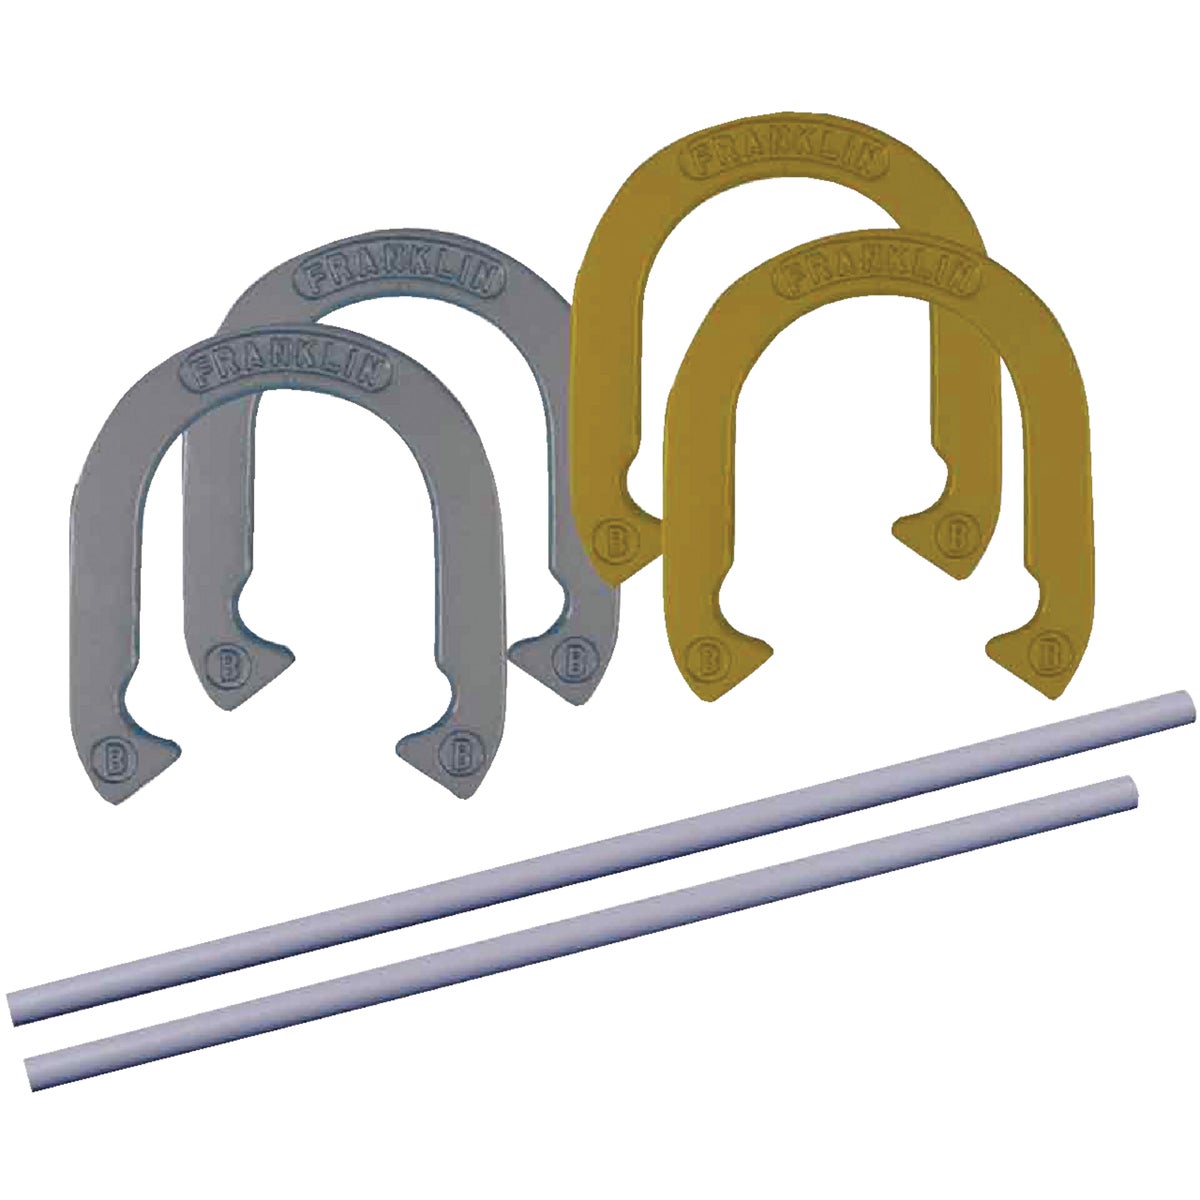 Item 808291, Official size and weight family horseshoe set.